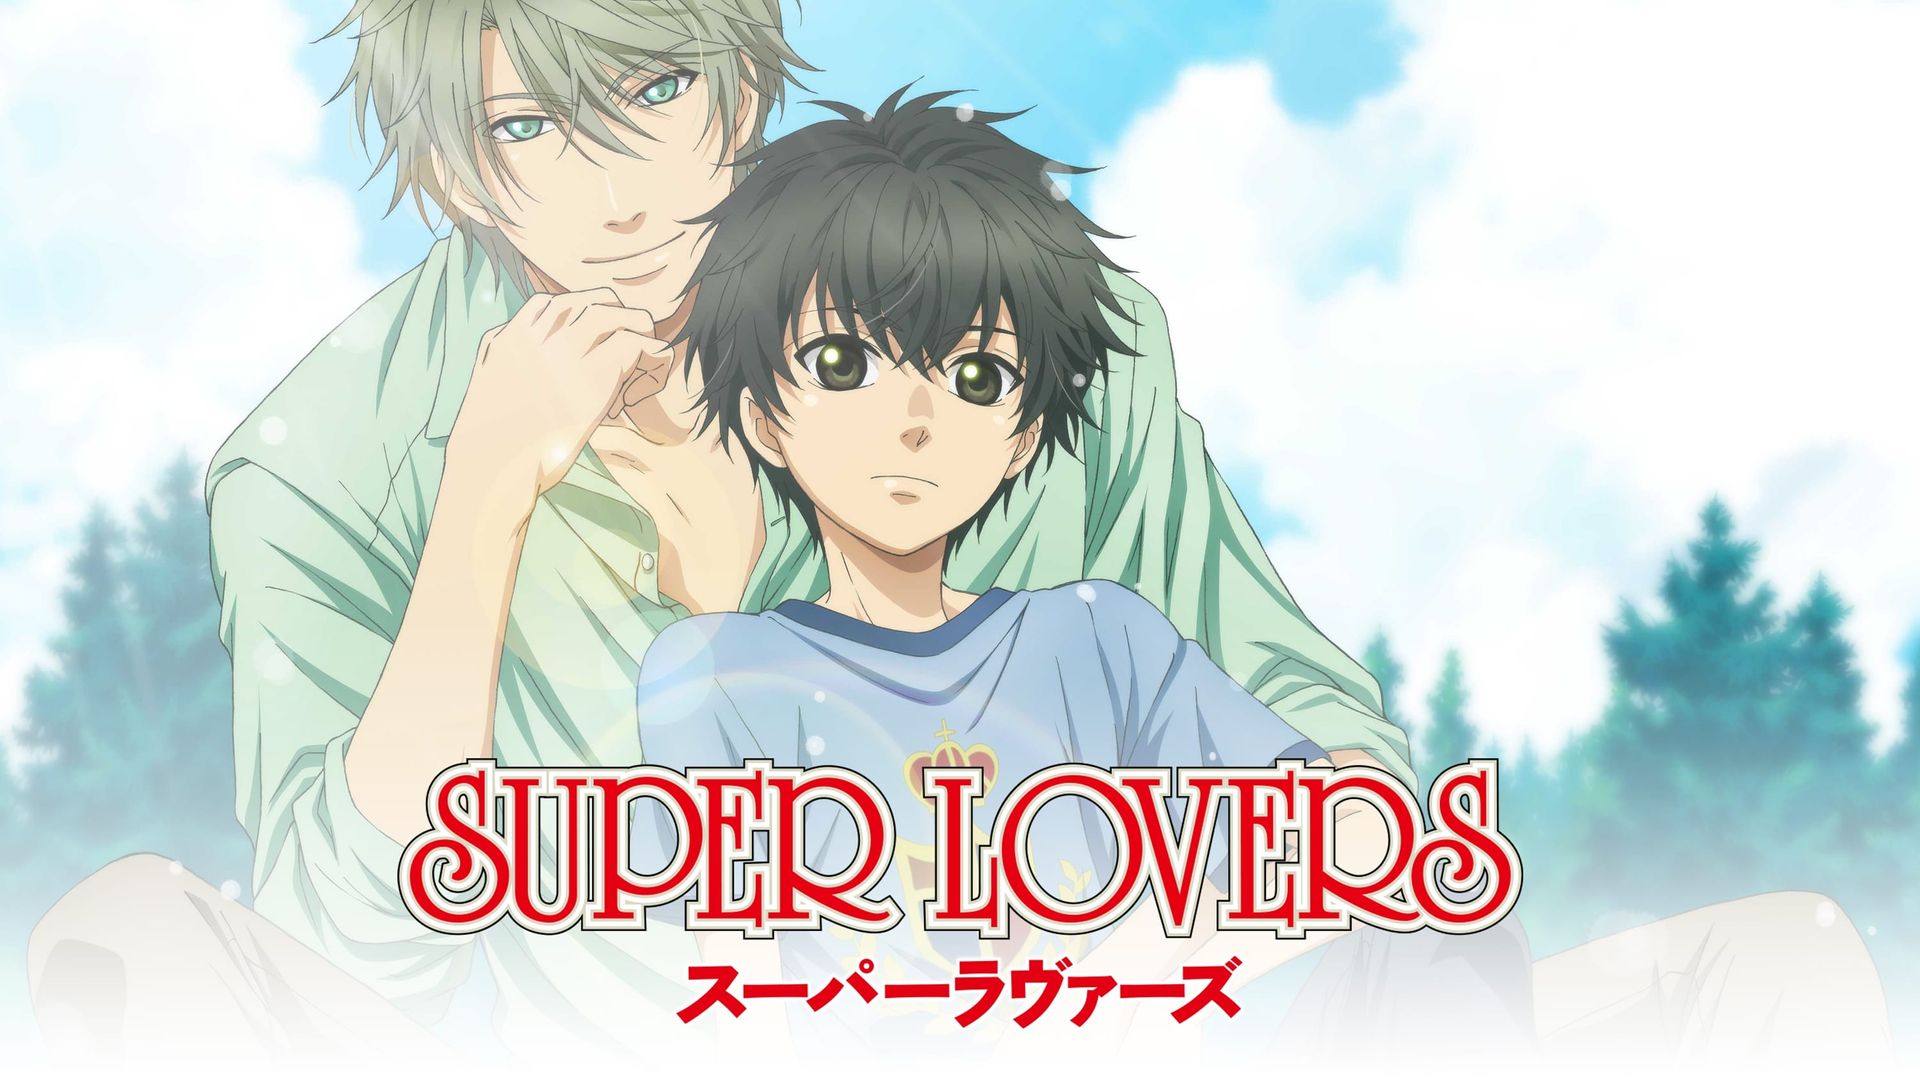 Super Lovers background